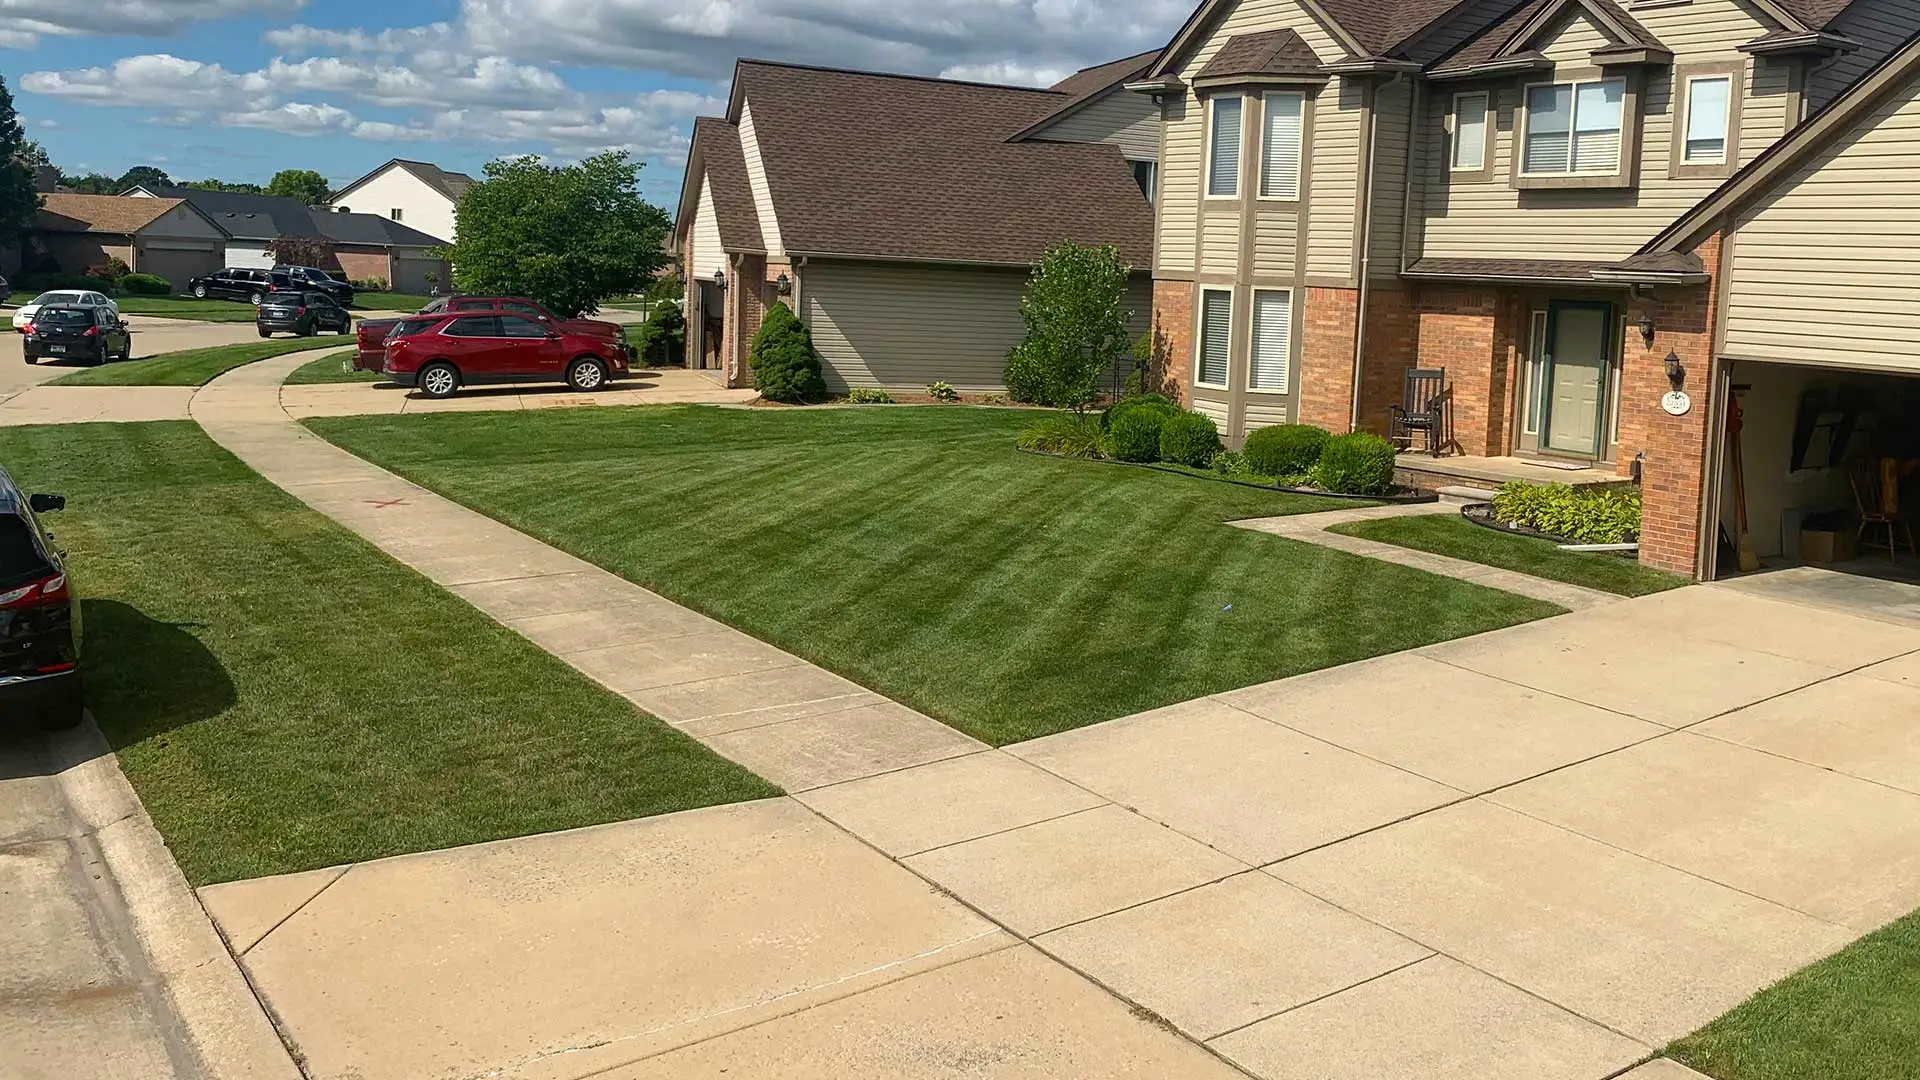 A Chesterfield, MI home with mowing lines in the front yard.